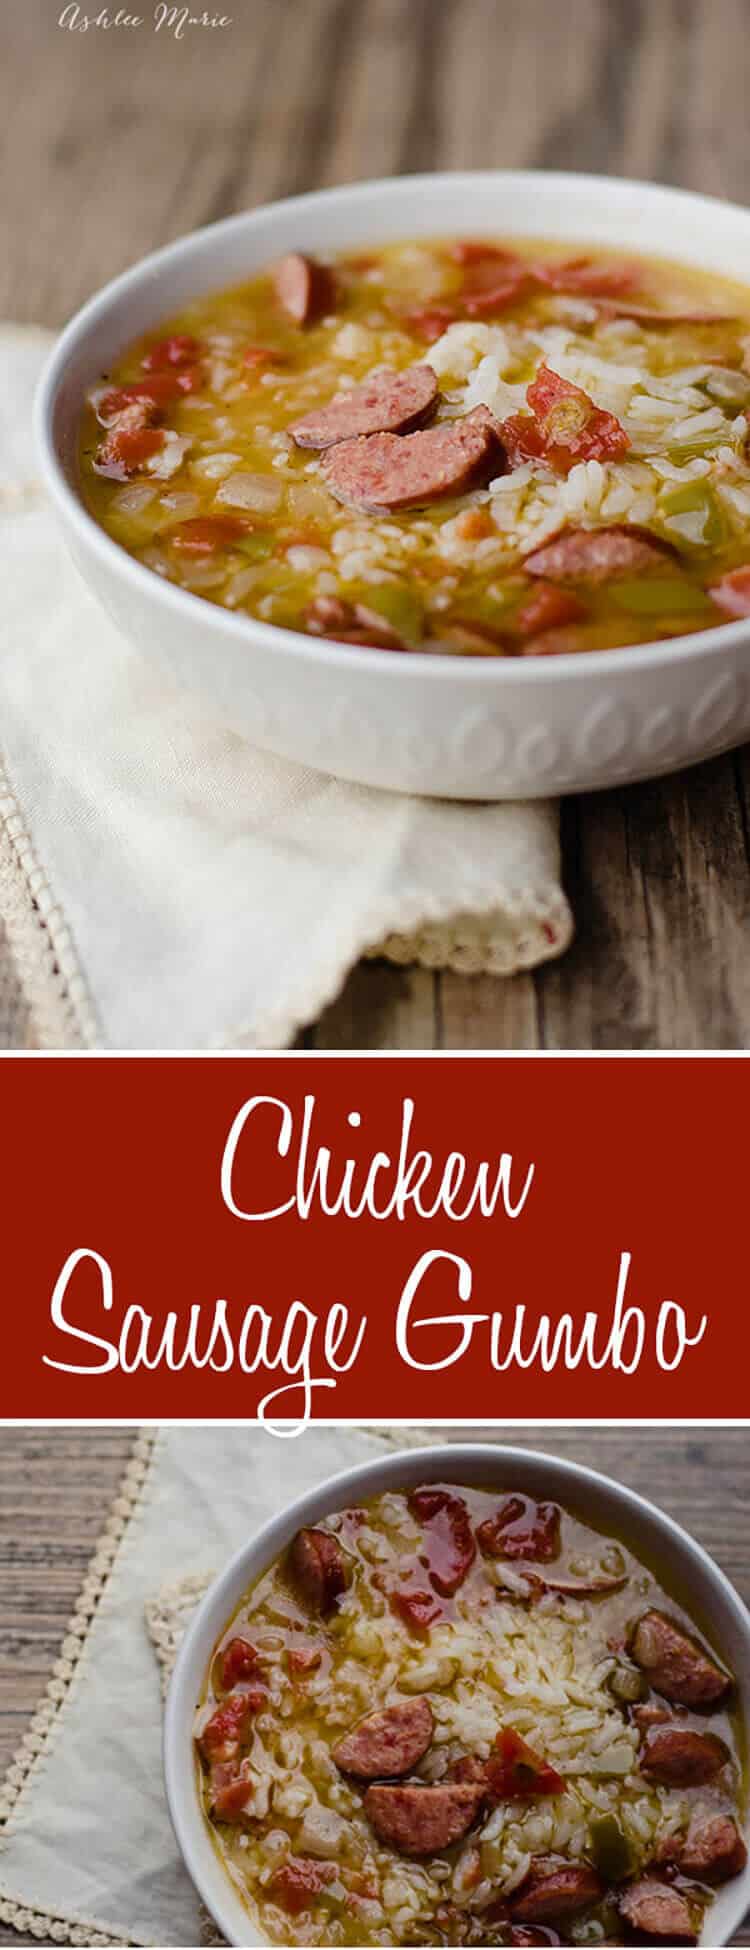 this chicken and sausage gumbo is one of my families favorite dishes. this is a kid friendly personalized version with no okra and some roux, but one that everyone loves